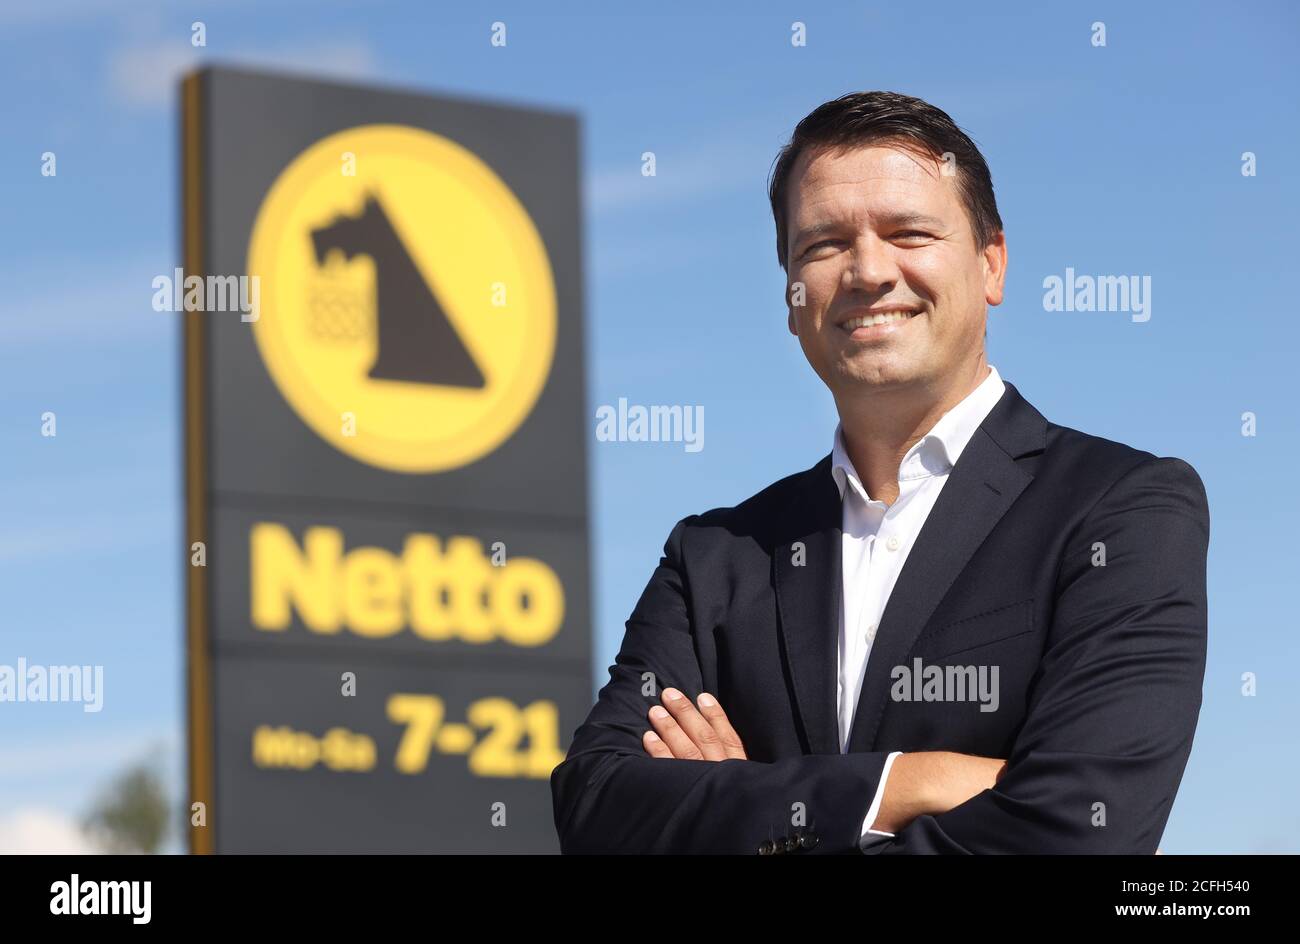 03 September 2020, Mecklenburg-Western Pomerania, Malchin: Managing Director Ingo Panknin of the retail chain Netto ApS & Co. KG is located on the premises of a Netto branch in Malchin. The first branch opened 30 years ago in Vorpommern. In the meantime, the company is one of the largest in the north-east of Germany with around 6000 employees. So far, the discounter has been represented 112 times in Mecklenburg-Western Pomerania alone, 143 times in Berlin and Brandenburg as well as in Saxony, Saxony-Anhalt, Lower Saxony, Hamburg and Schleswig-Holstein. (to dpa 'Only MV retail chain wants to gr Stock Photo